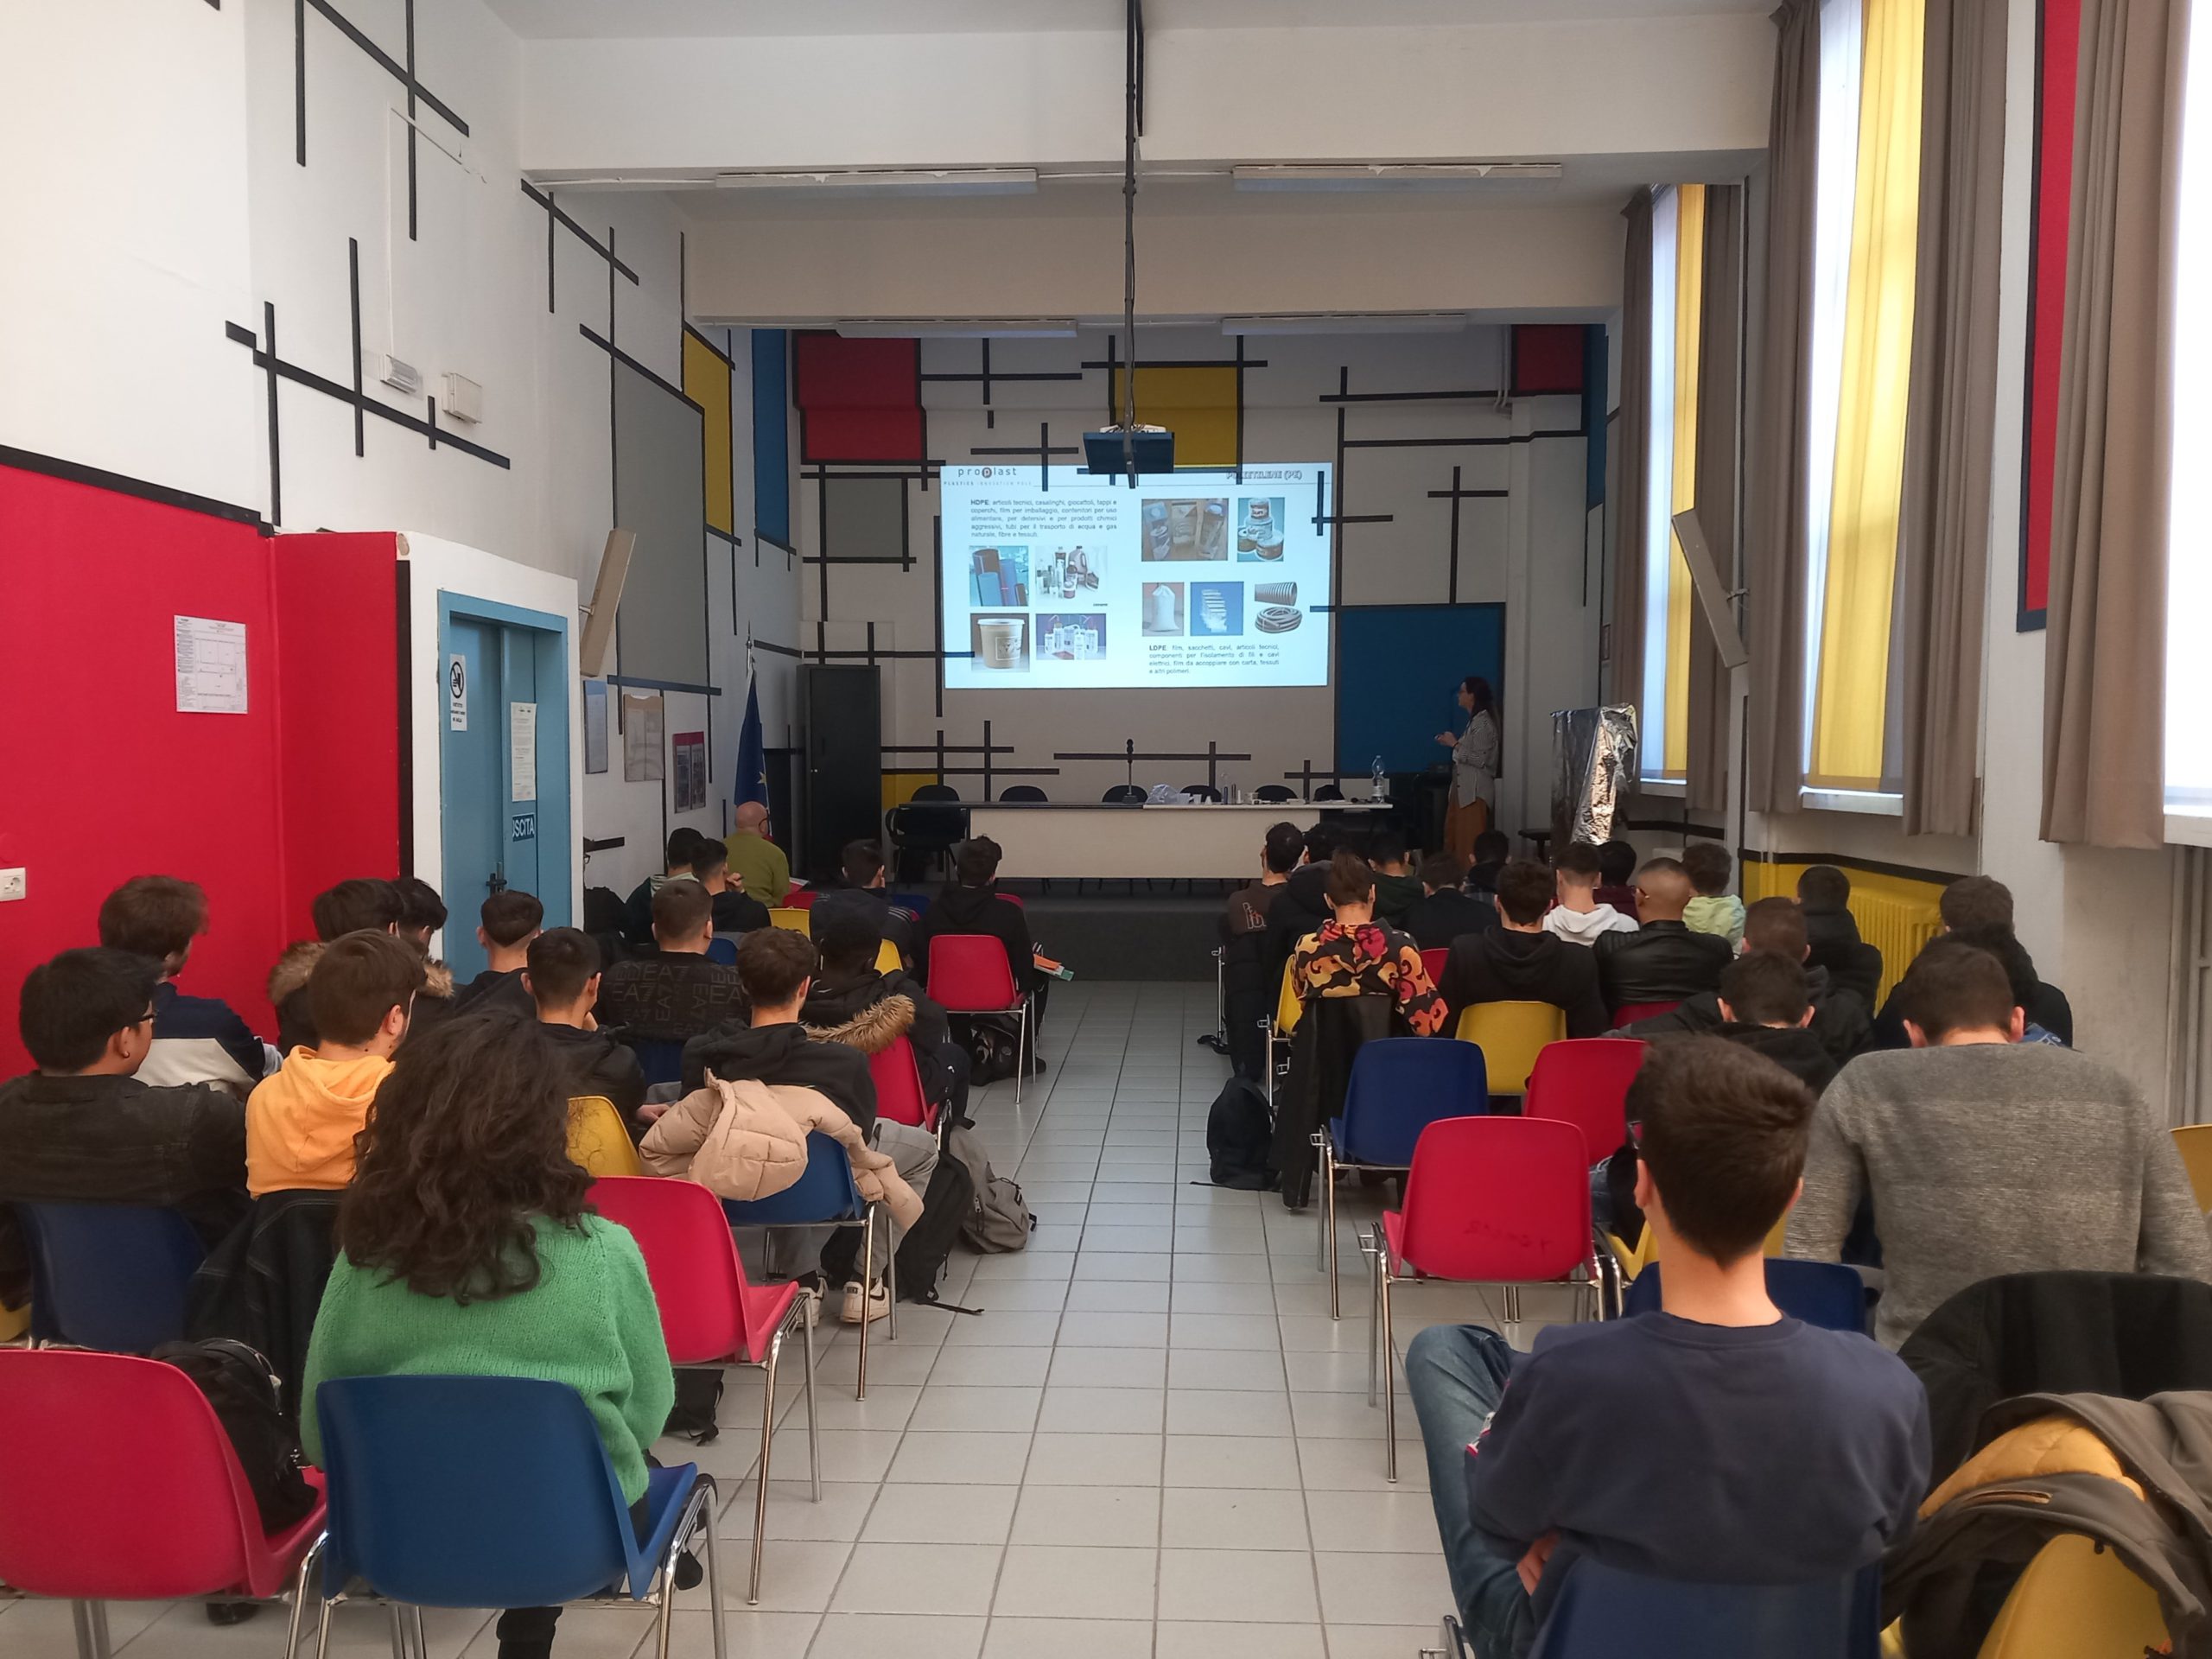 Lesson on “Polymeric materials and sustainability” at the Nervi-Fermi Institute in Alessandria